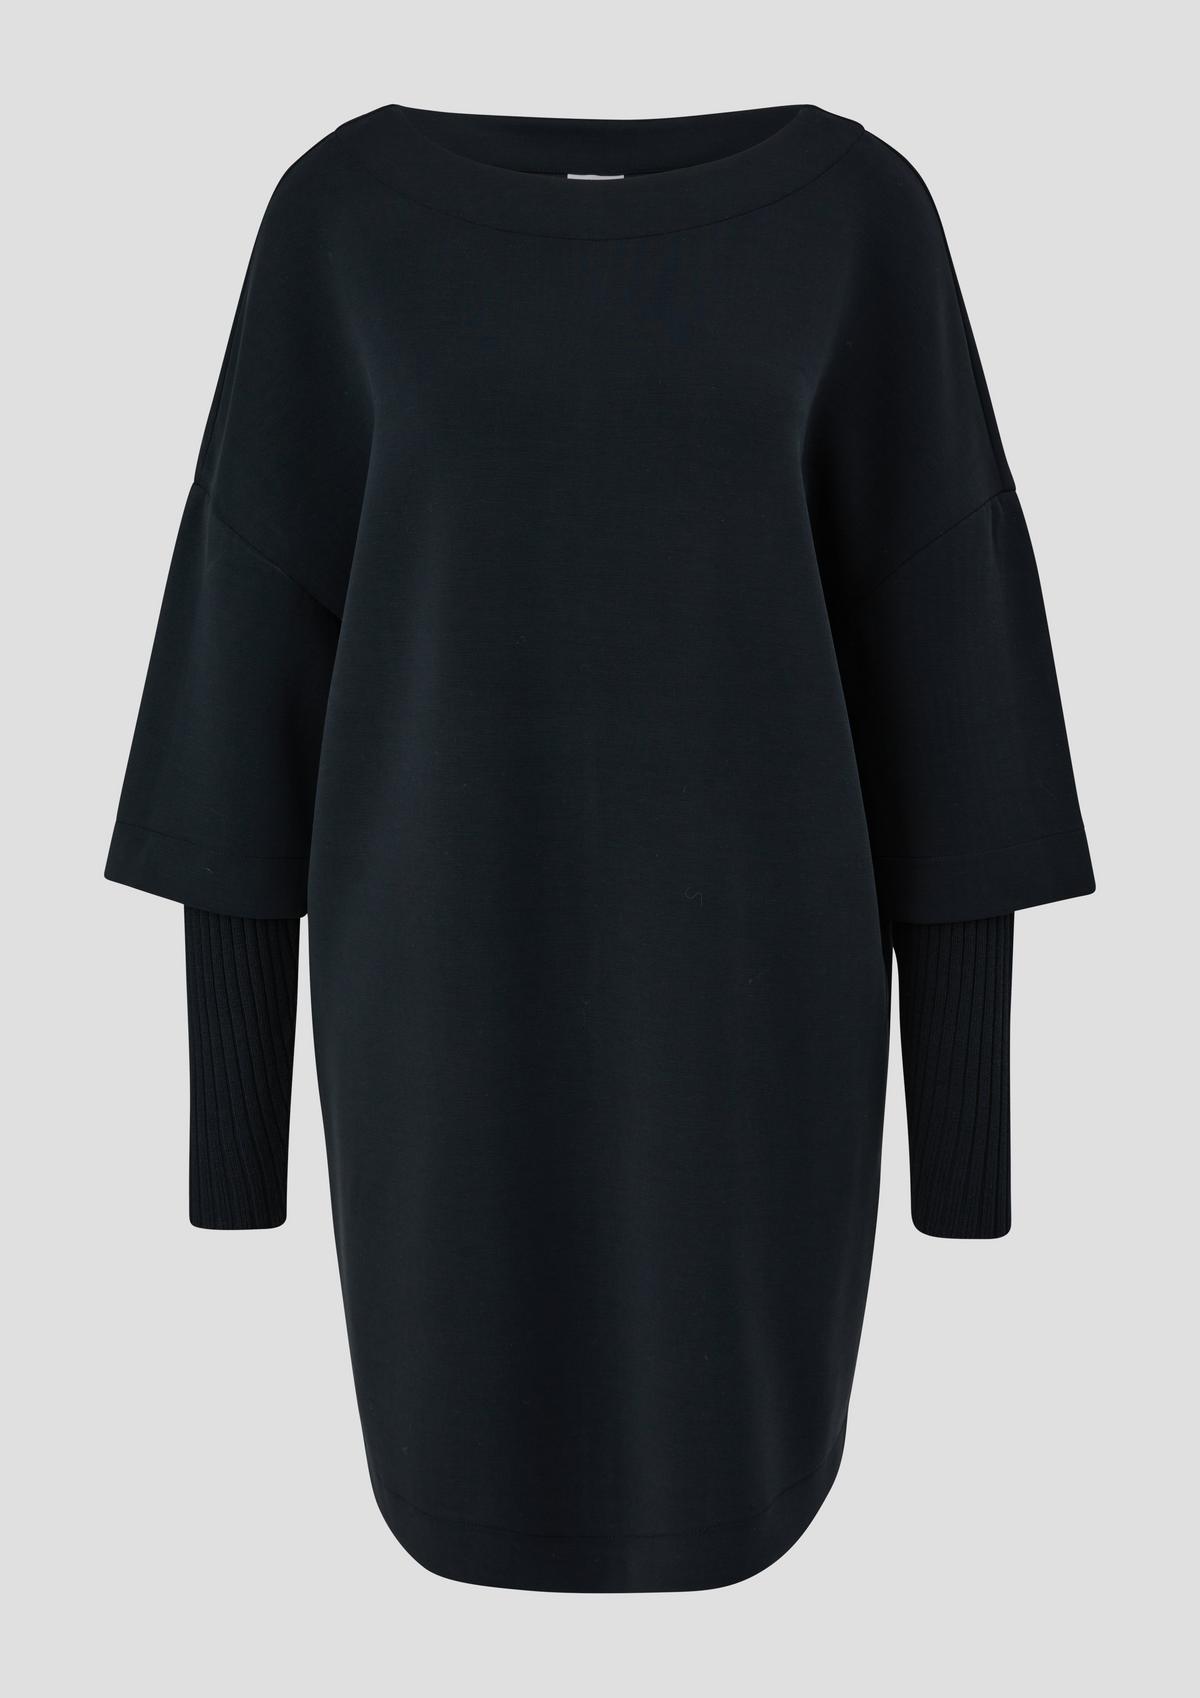 s.Oliver Loosely cut dress made of scuba sweatshirt fabric